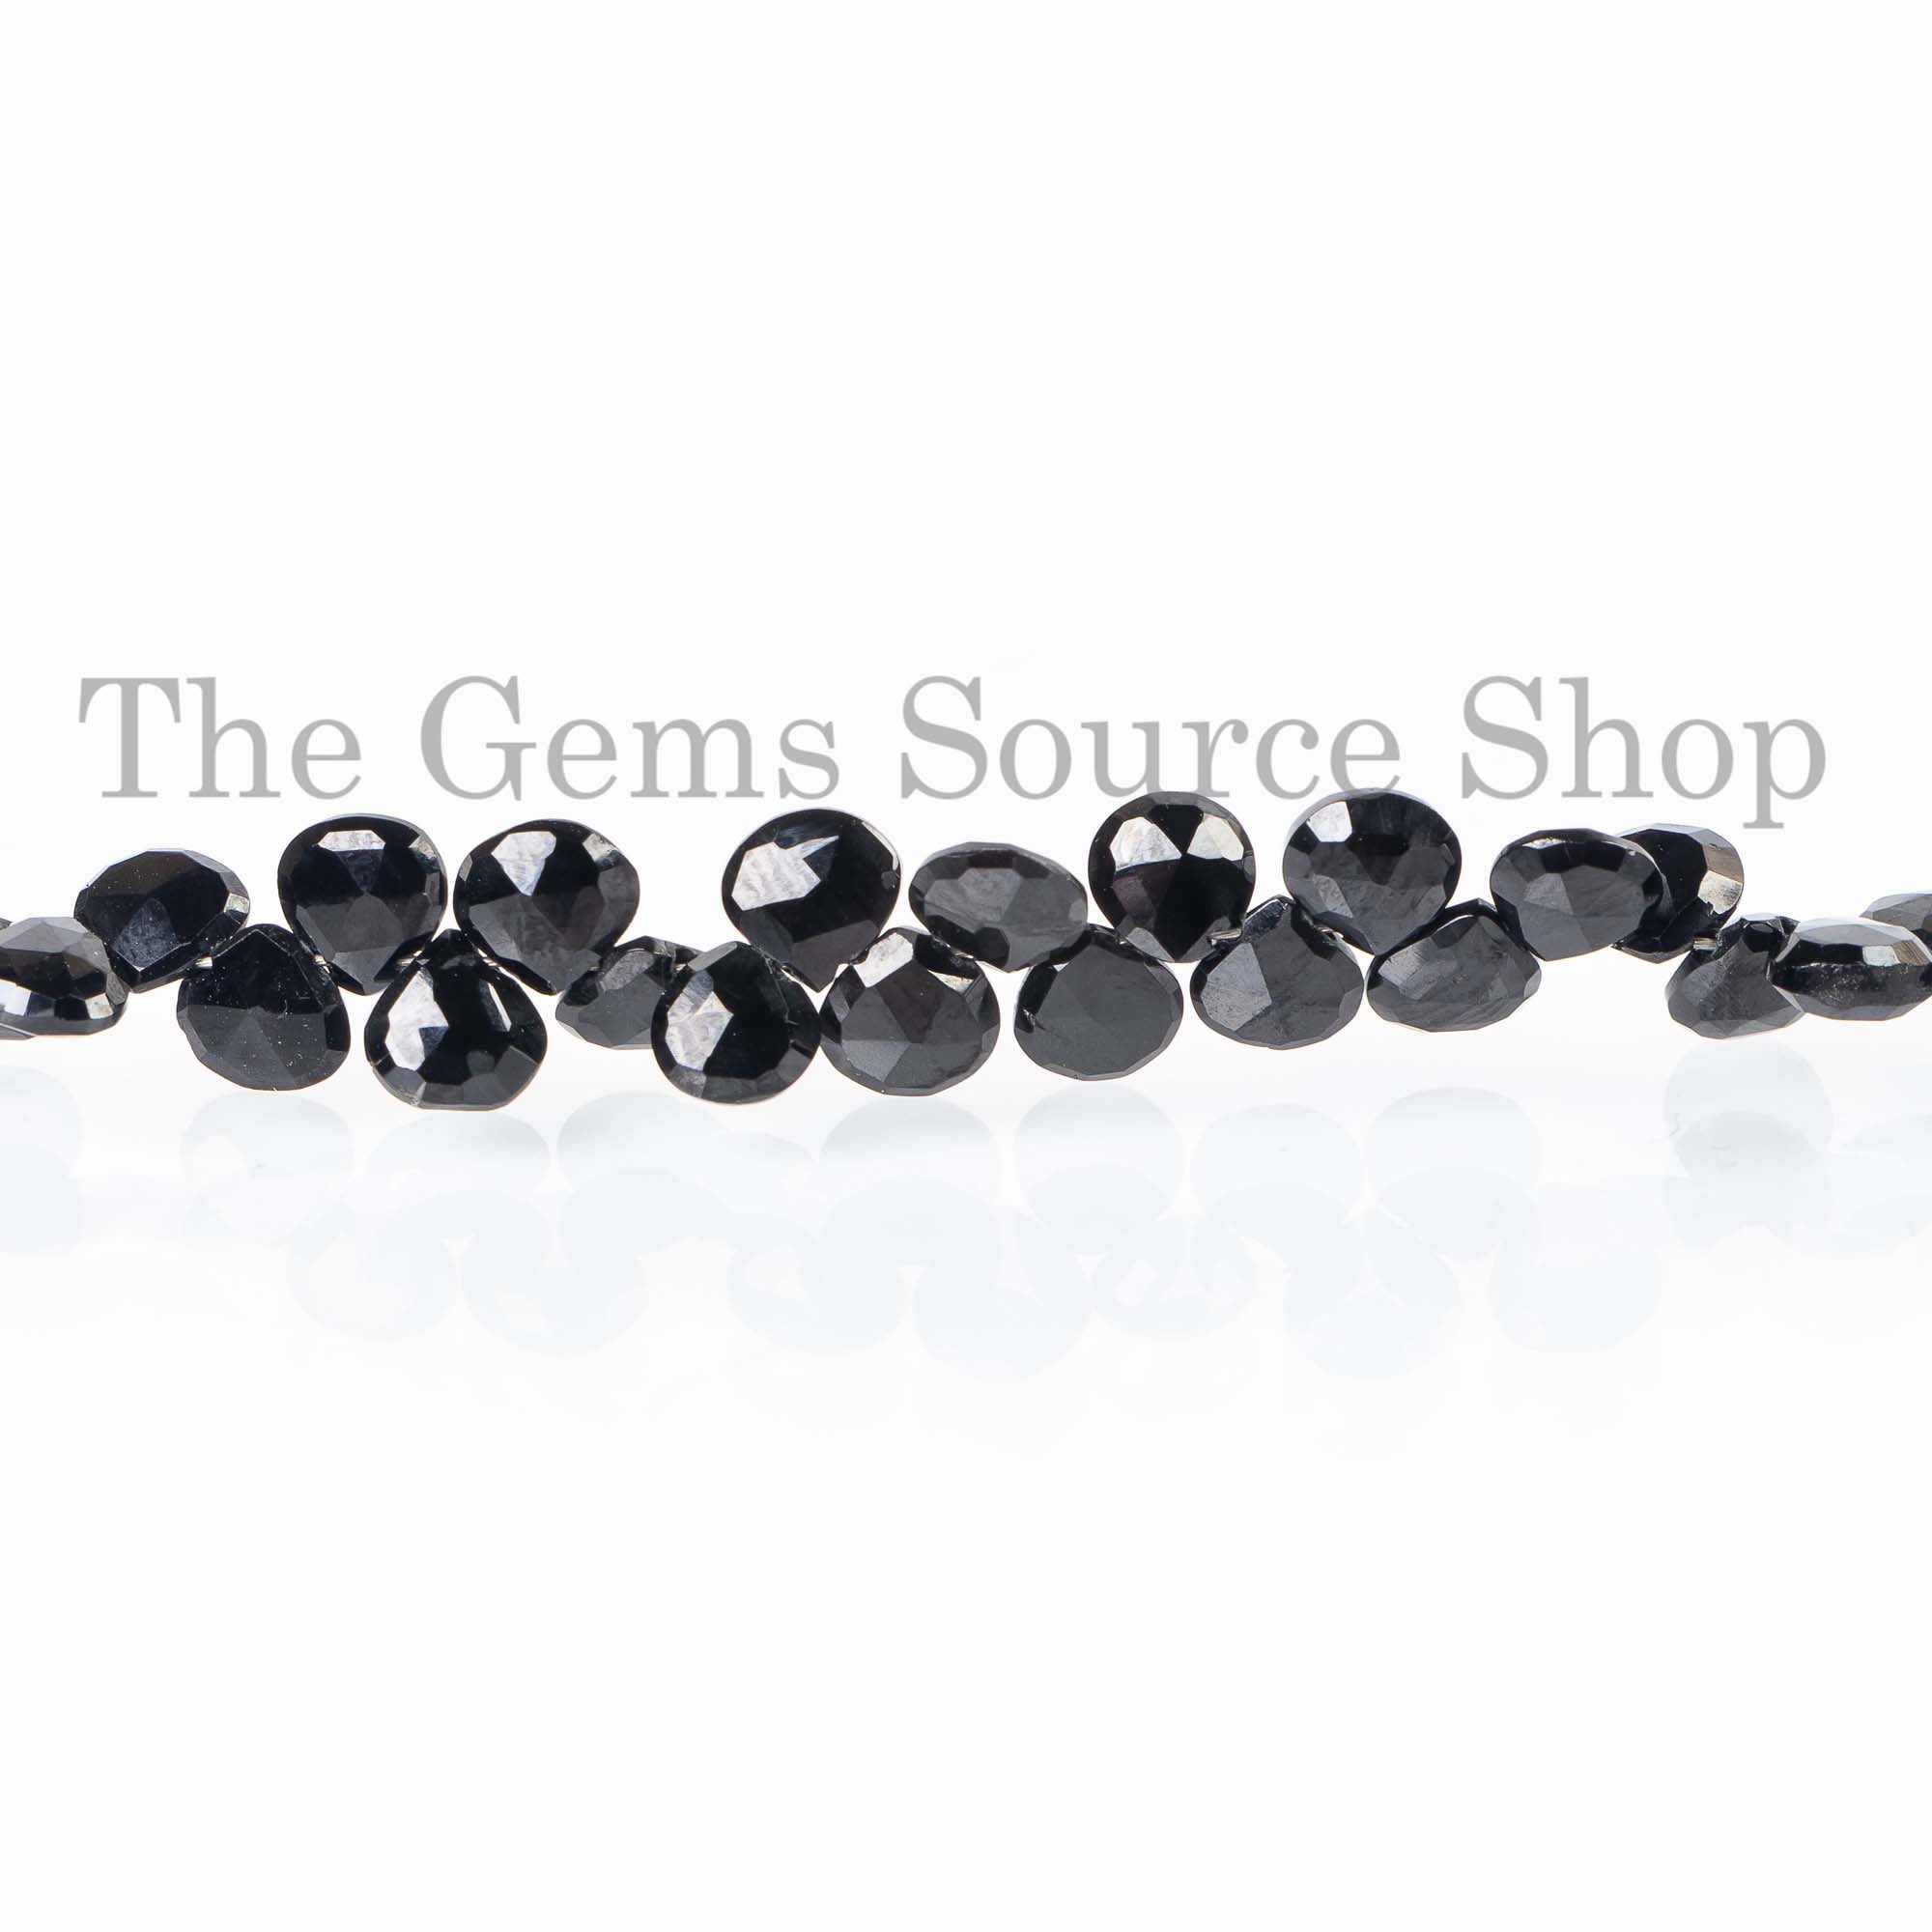 Black Spinel Faceted Heart Beads, 5-5.5mm Black Spinel Beads, Black Spinel Faceted Beads, Black Spinel Heart Beads, Beads For Jewelry